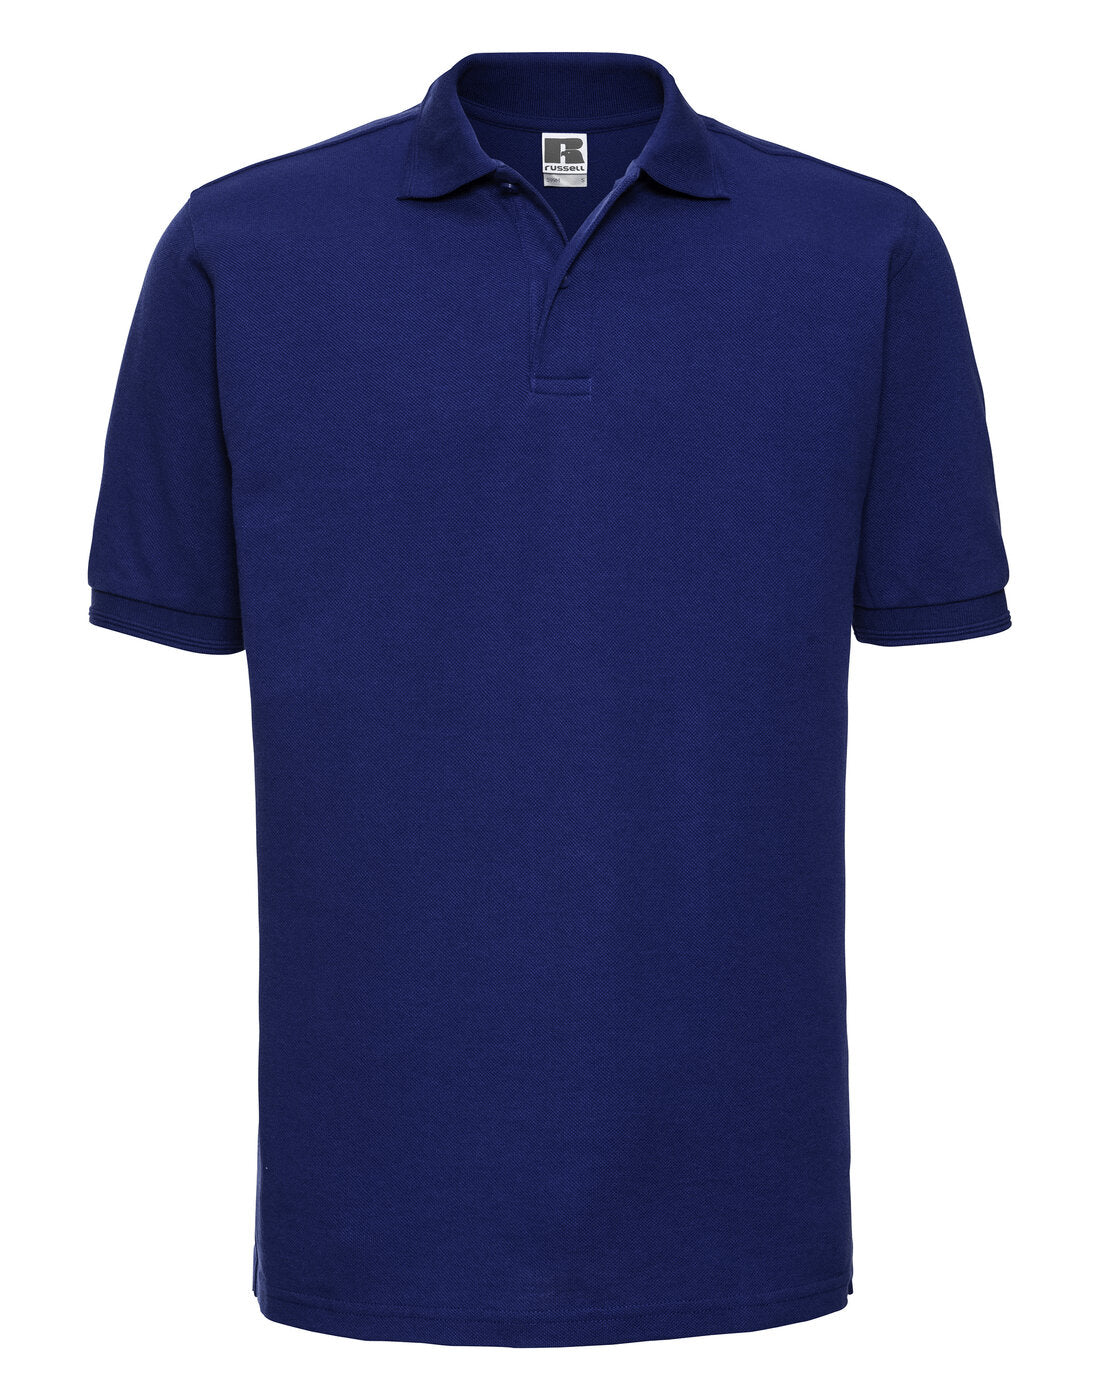 Russell Hardwearing Polycotton Polo Bright Royal